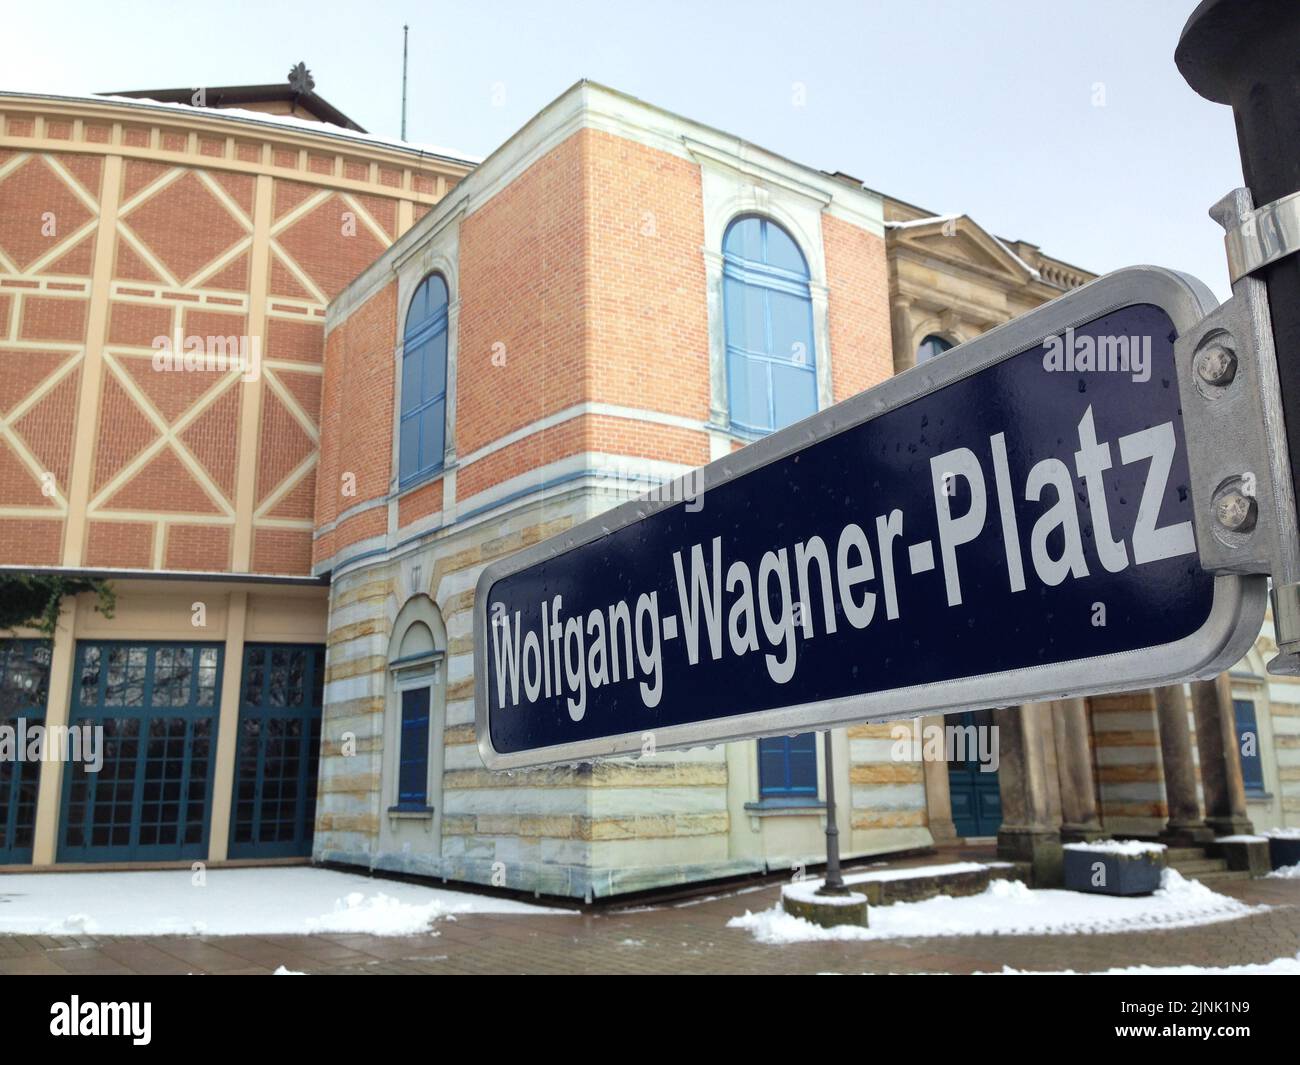 BAYREUTH, GERMANY - JANUARY 4, 2015: At Richard Wagner's festival concert hall in Bayreuth, Germany on January 4, 2015. Stock Photo